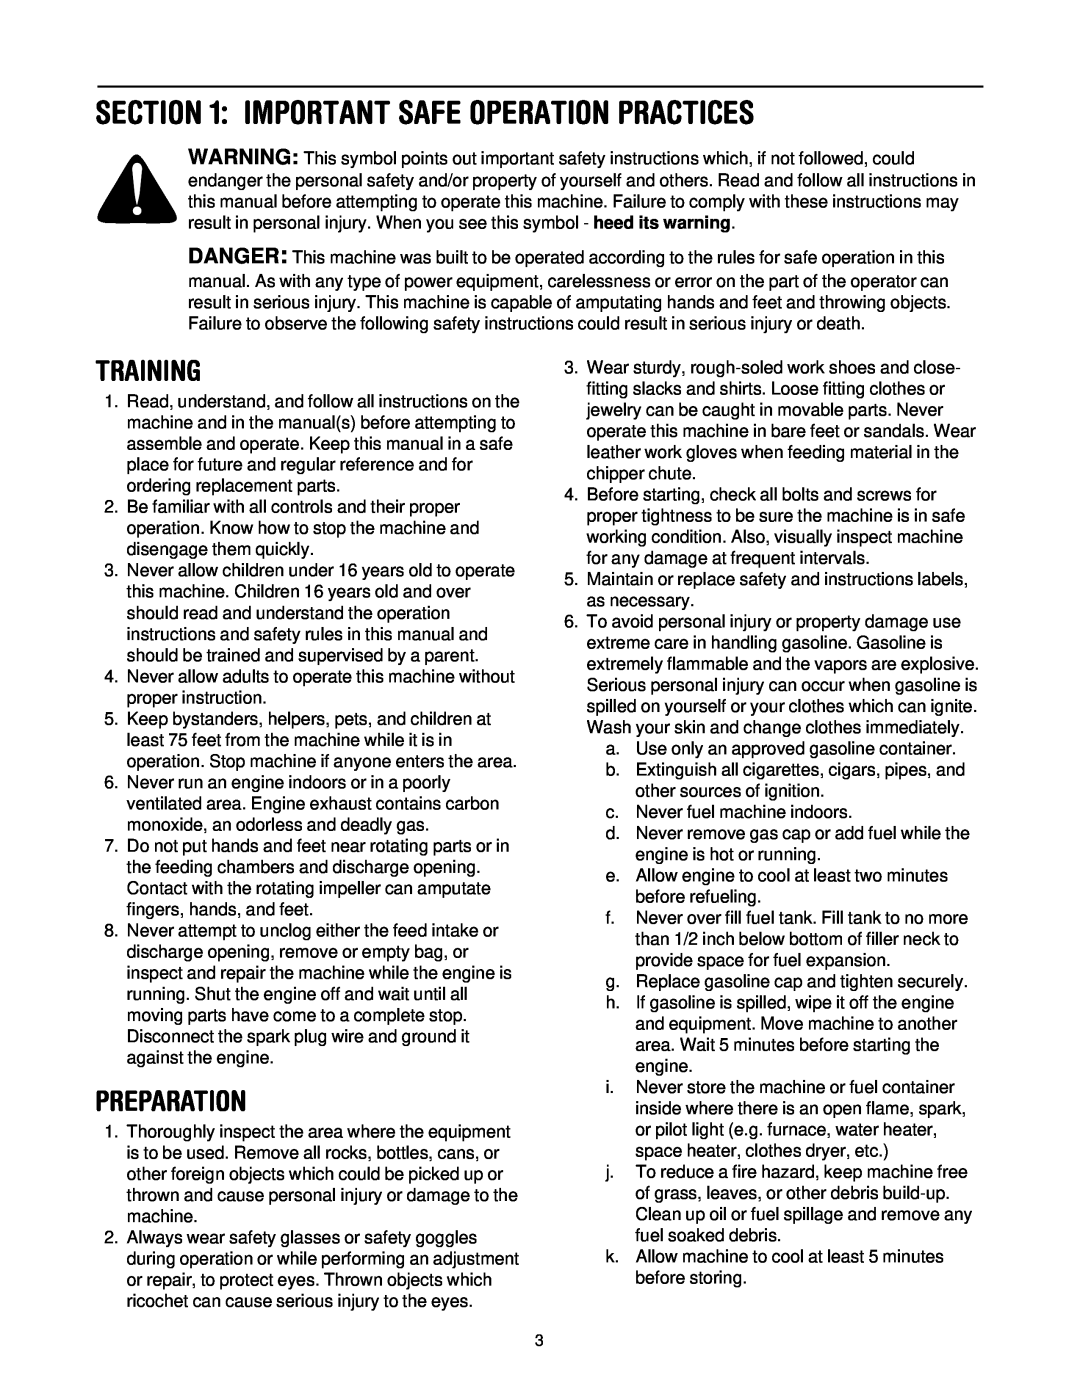 MTD 465 manual Important Safe Operation Practices, Training, Preparation 